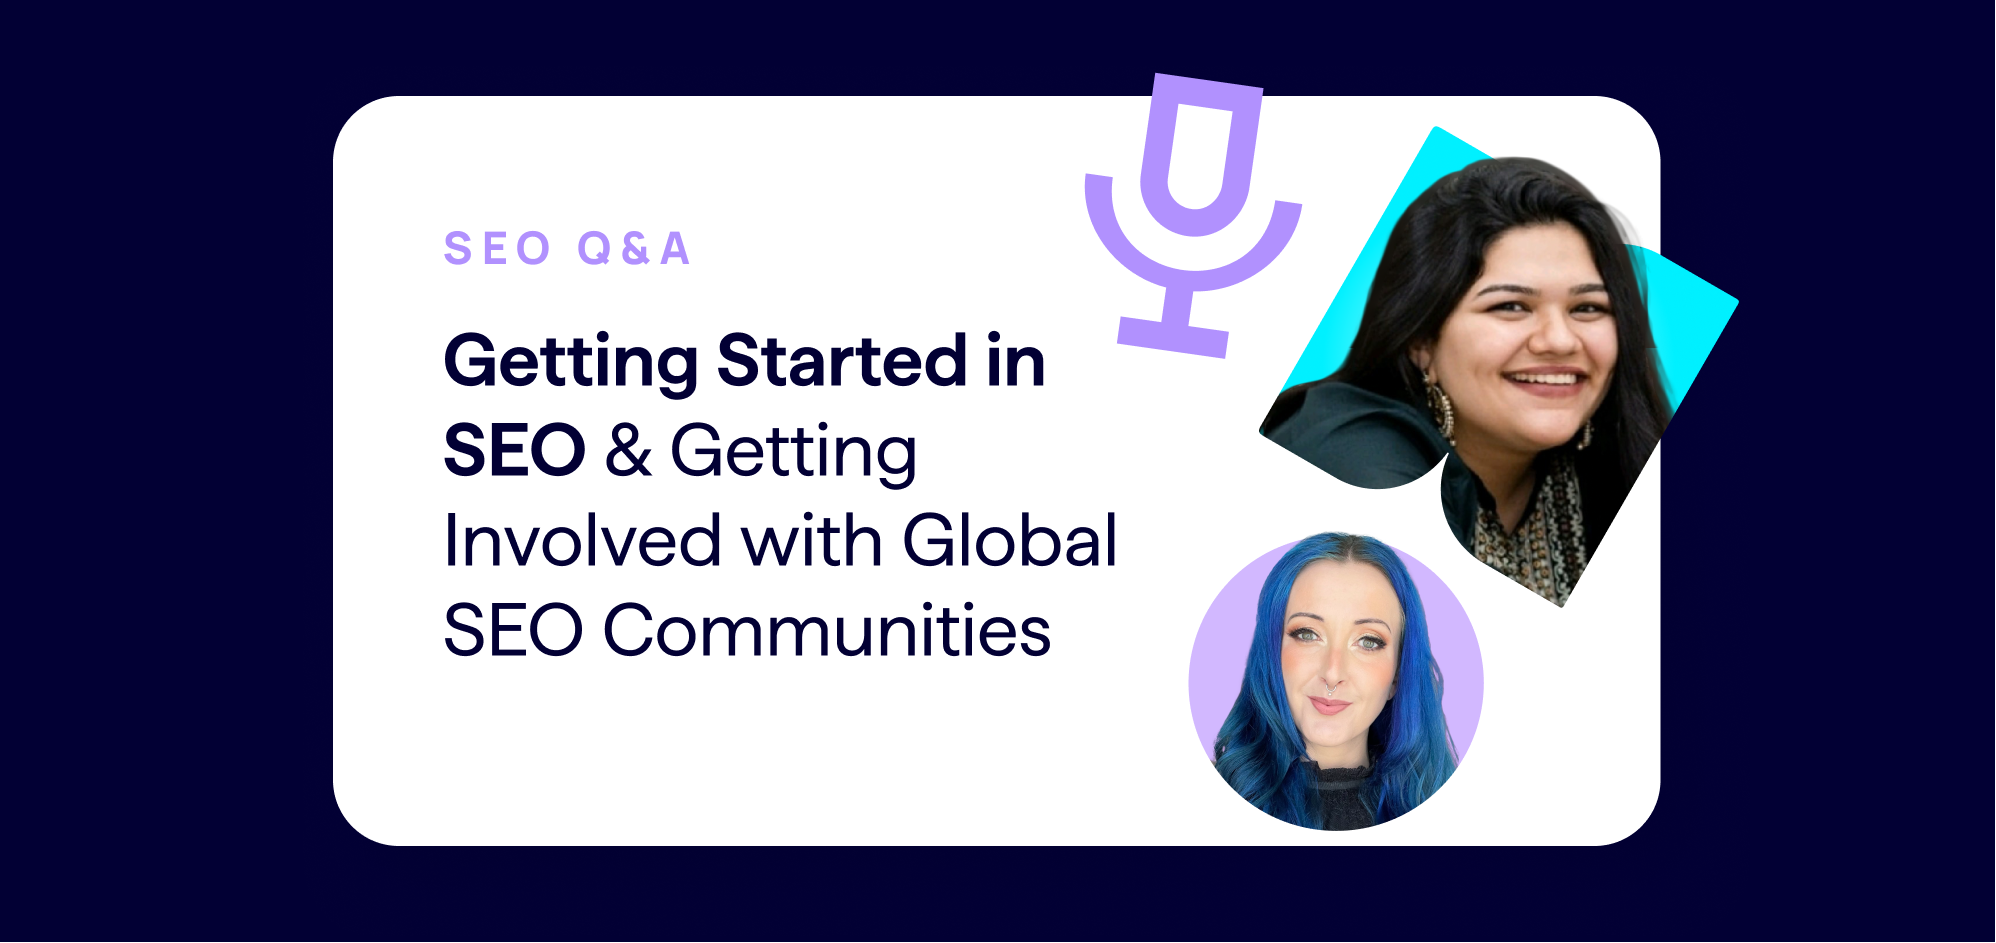 SEO Interview Series: Getting Started in SEO & Getting Involved With Global SEO Communities